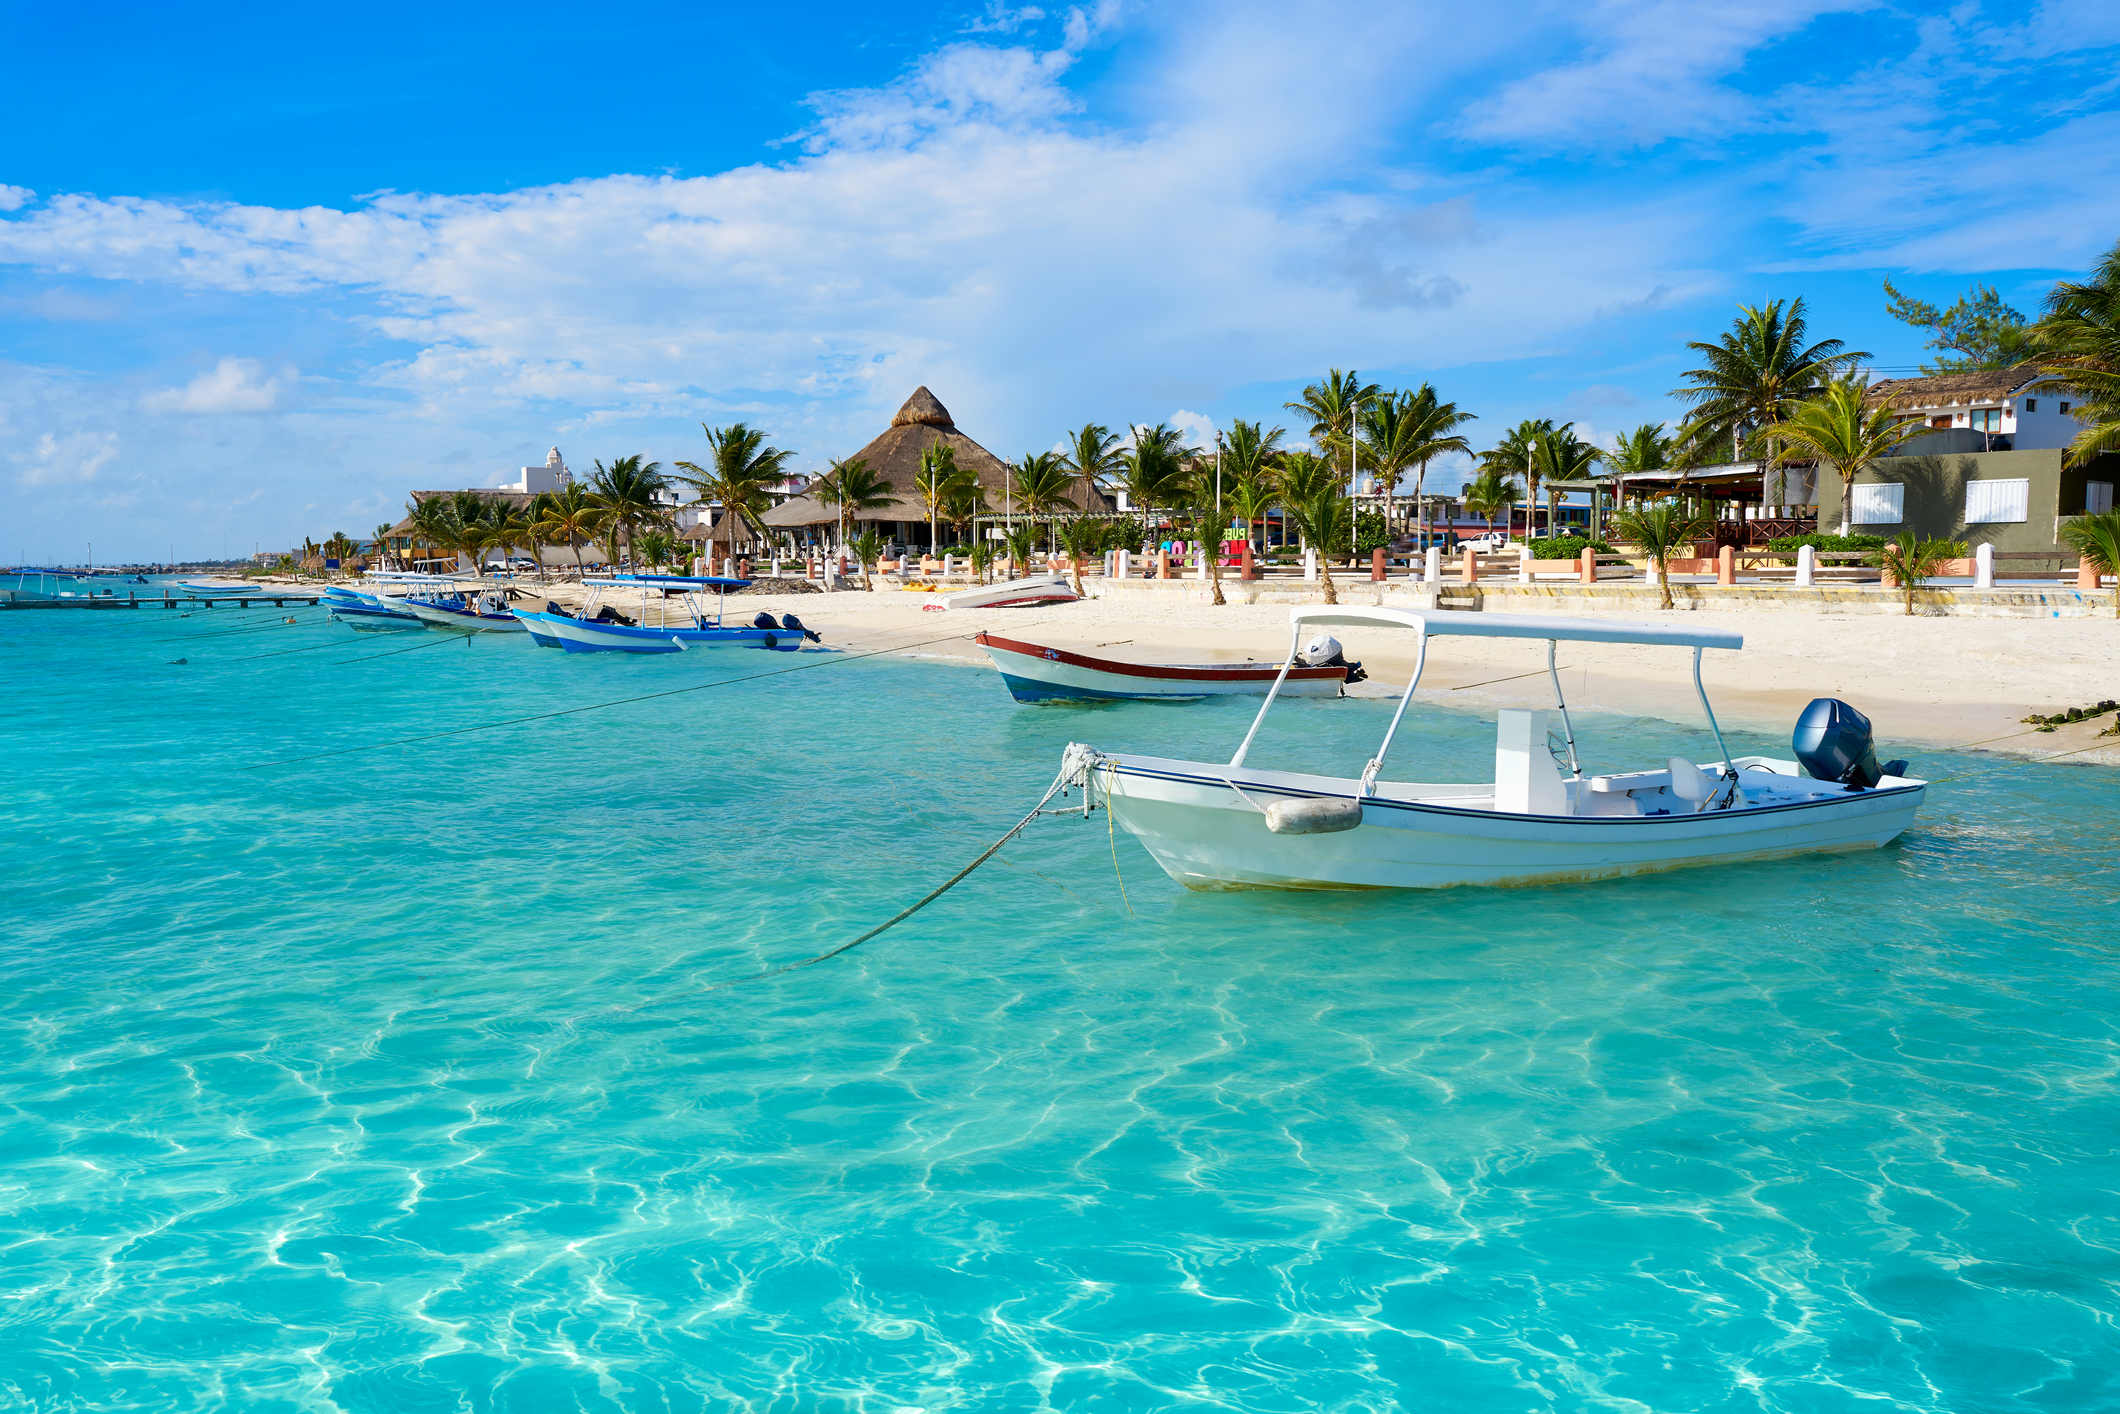 Delta flights to Mexico & the Caribbean from $327 round-trip